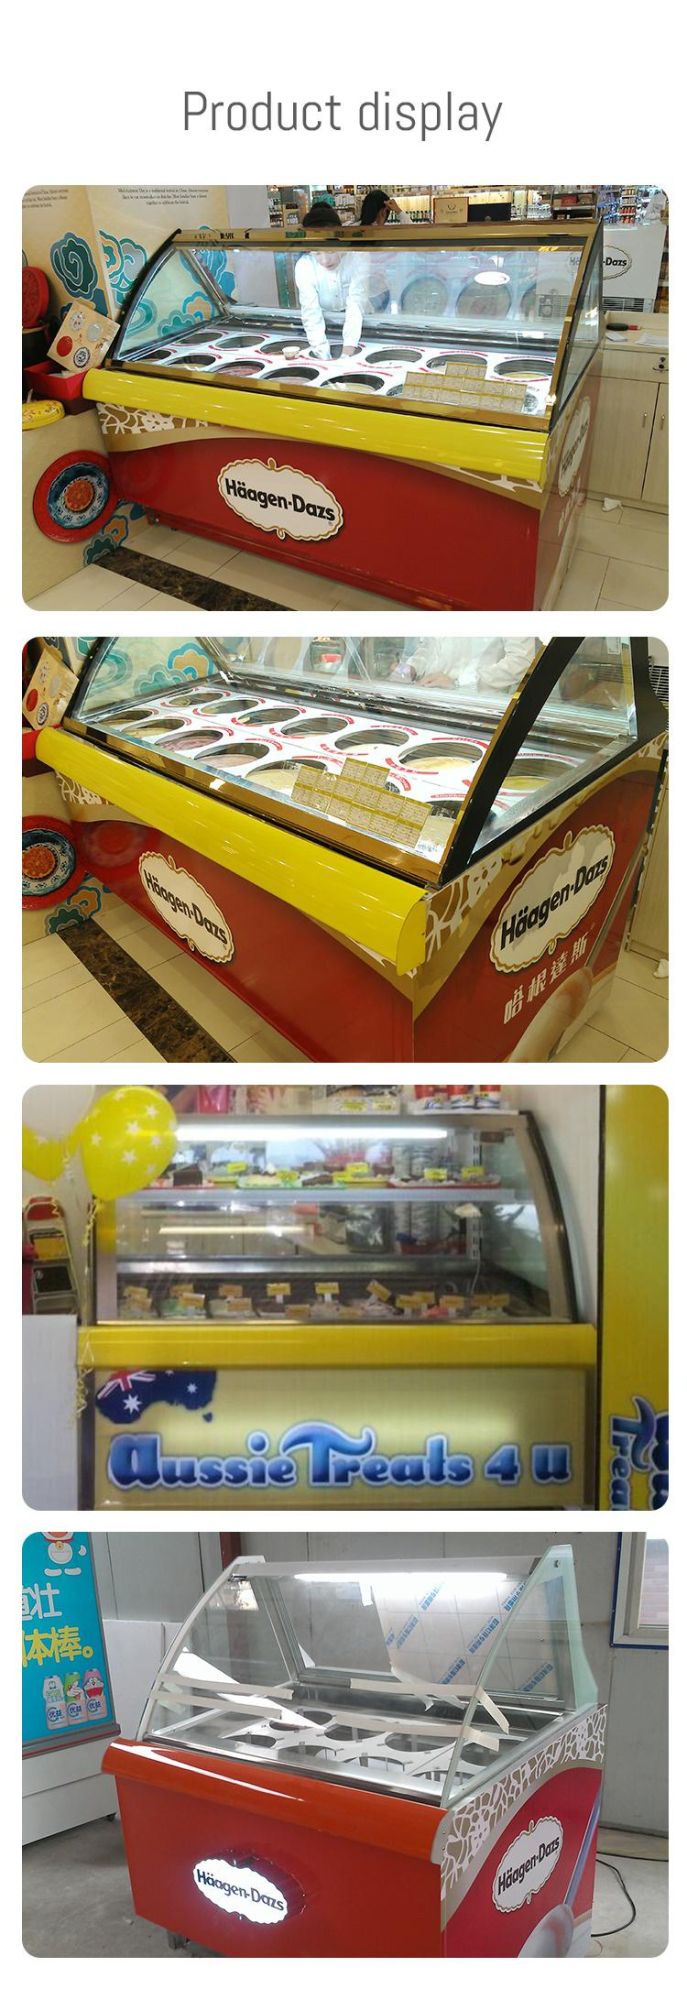 Commercial Sliding Glass Top Ice Cream Display Cabinet